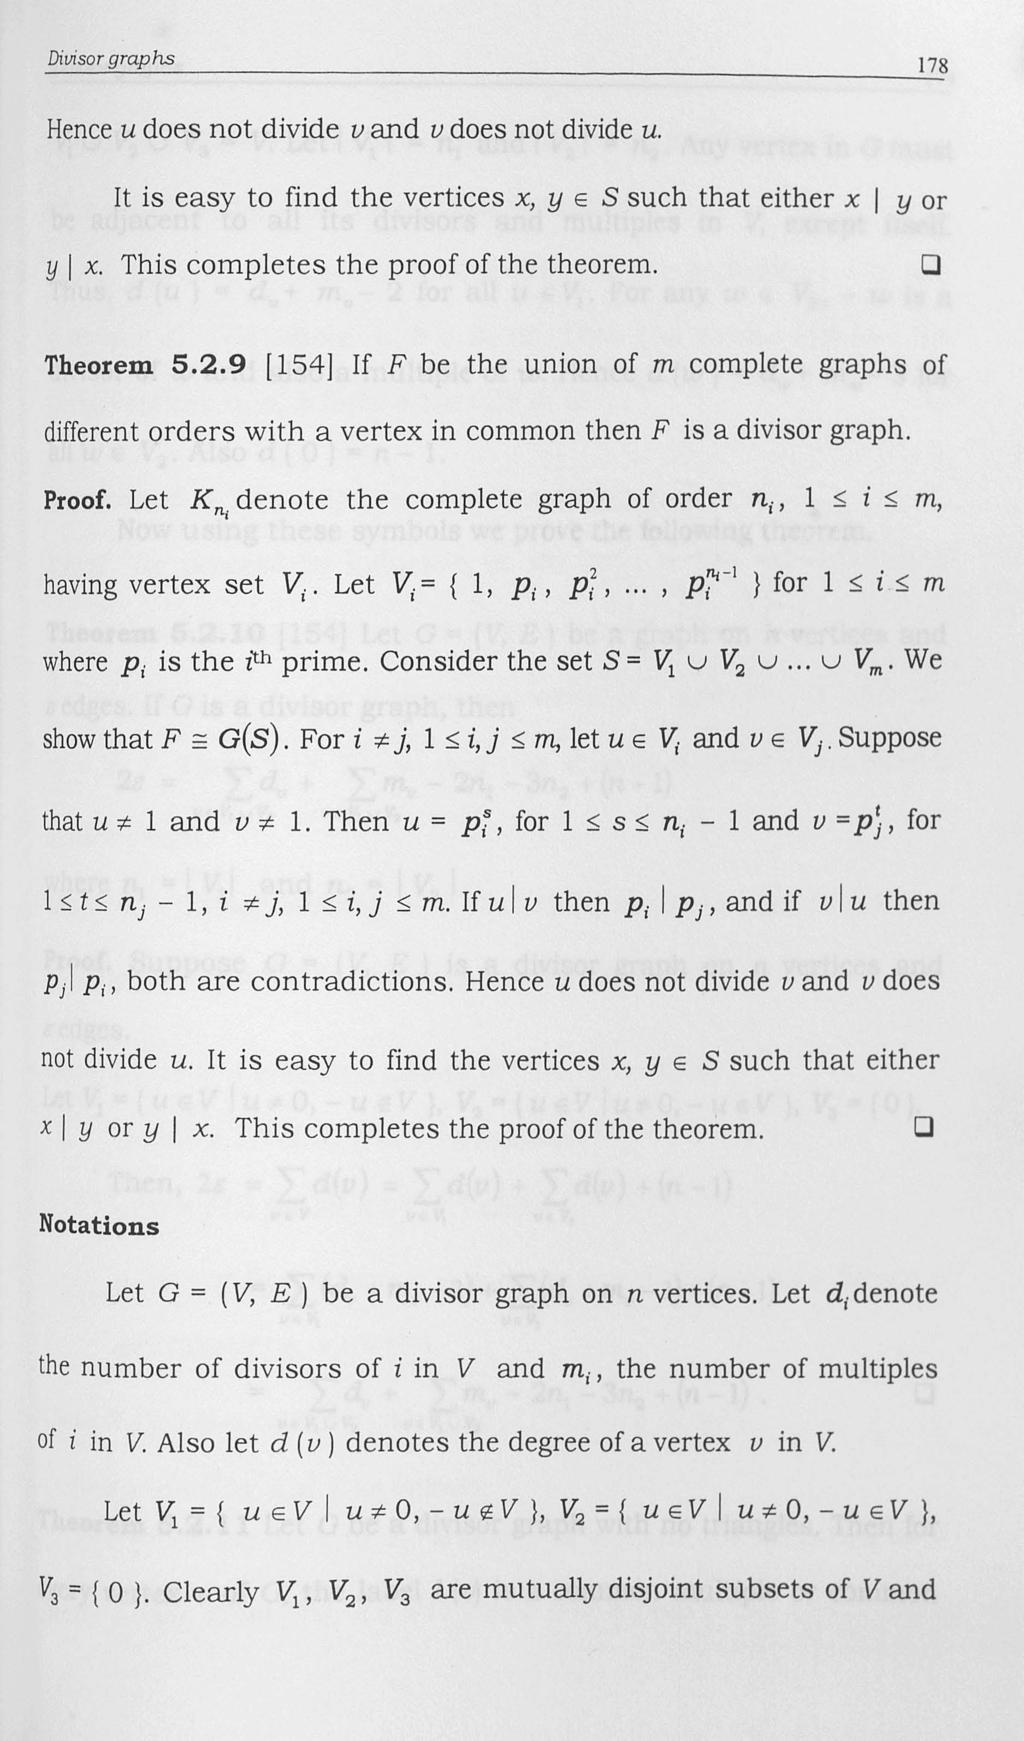 DilJisor graphs 178 Hence u does not divide v and v does not divide u. It is easy to find the vertices x) yes such that either x I y or Y I x. This completes the proof of the theorem. CJ Theorem 5.2.